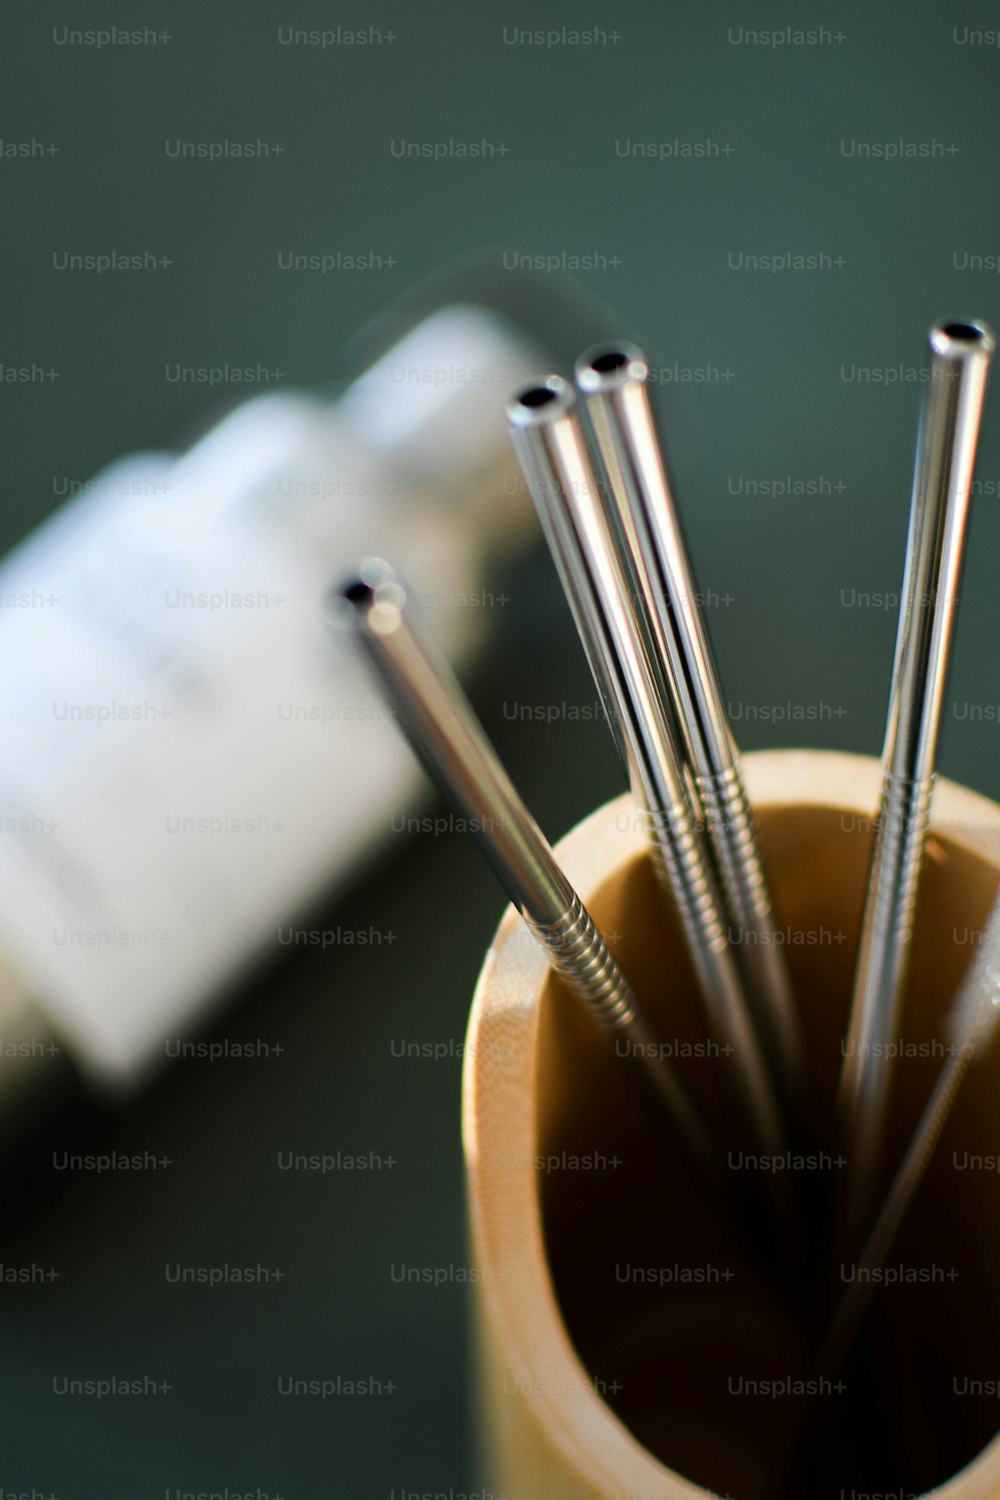 a close up of a cup filled with metal straws